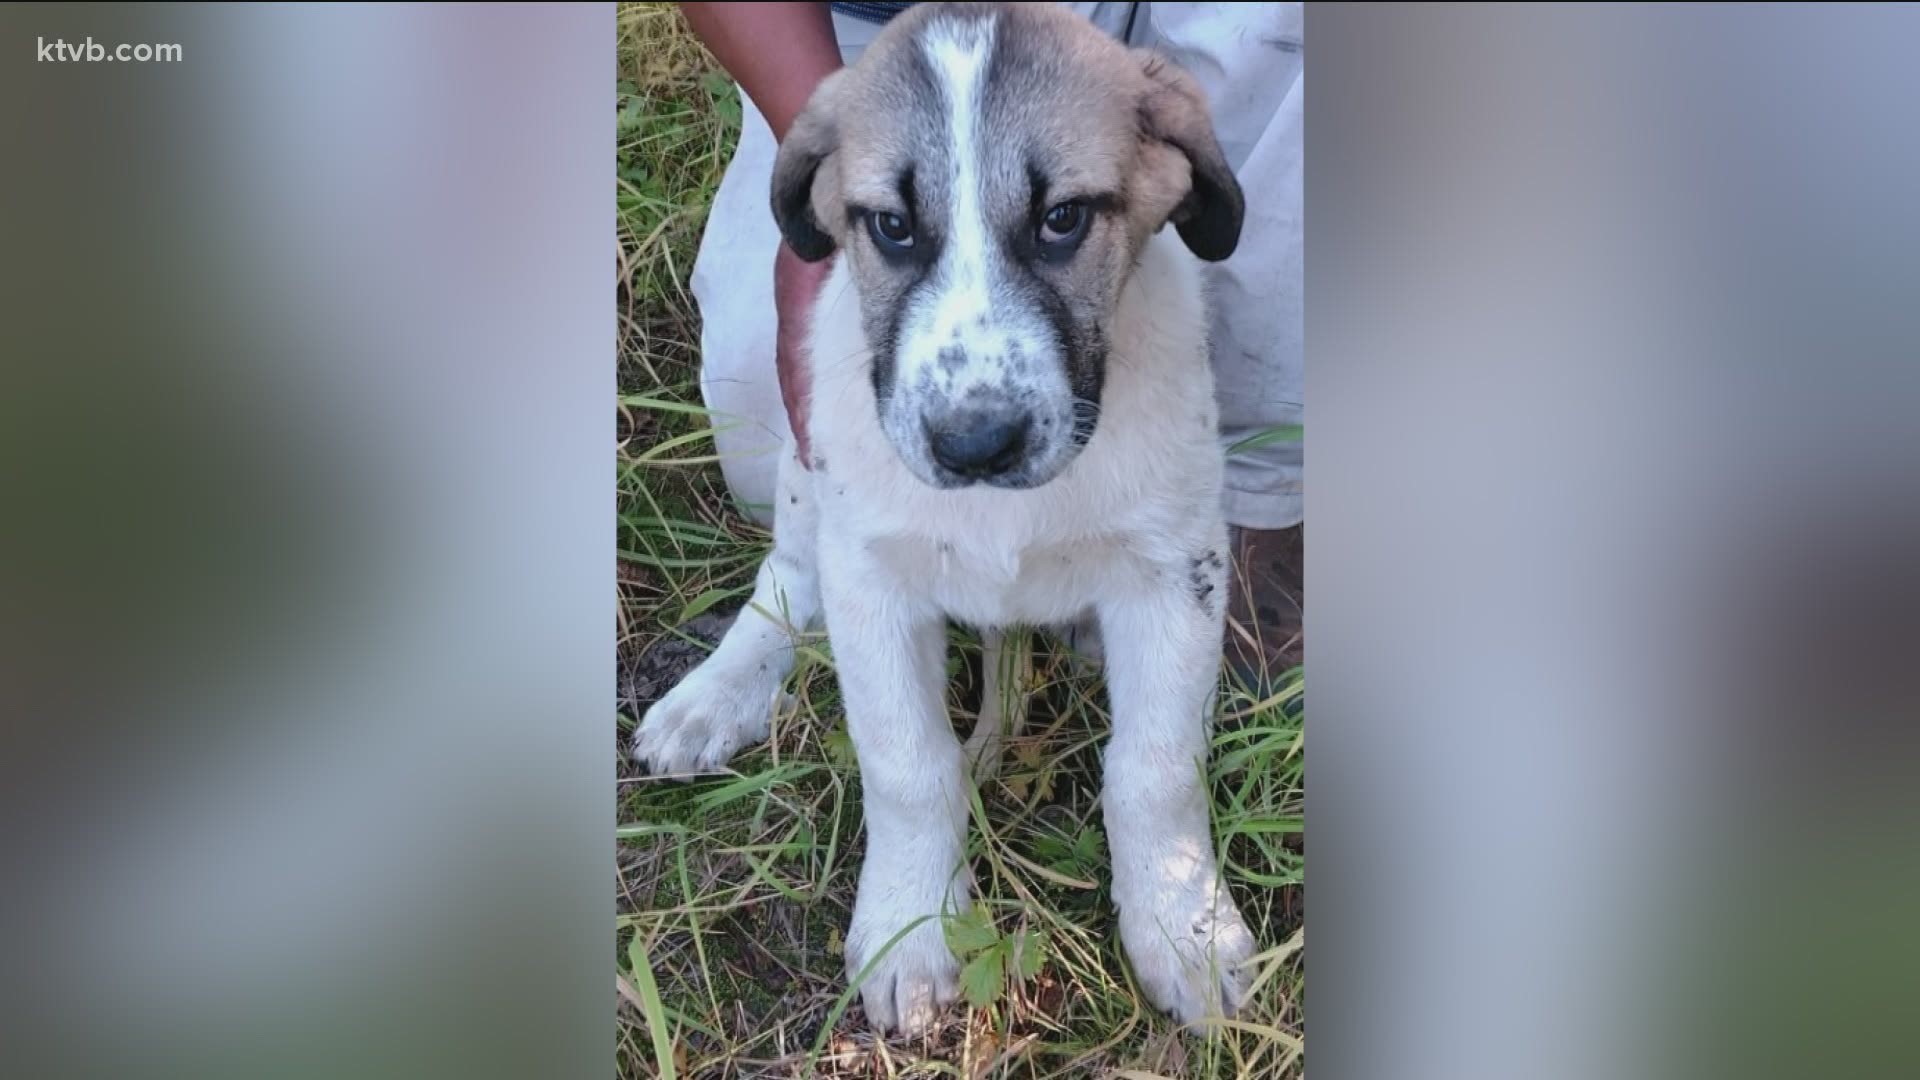 Investigators believe Christopher Lee Nix took the puppies, which were working as livestock guard dogs.